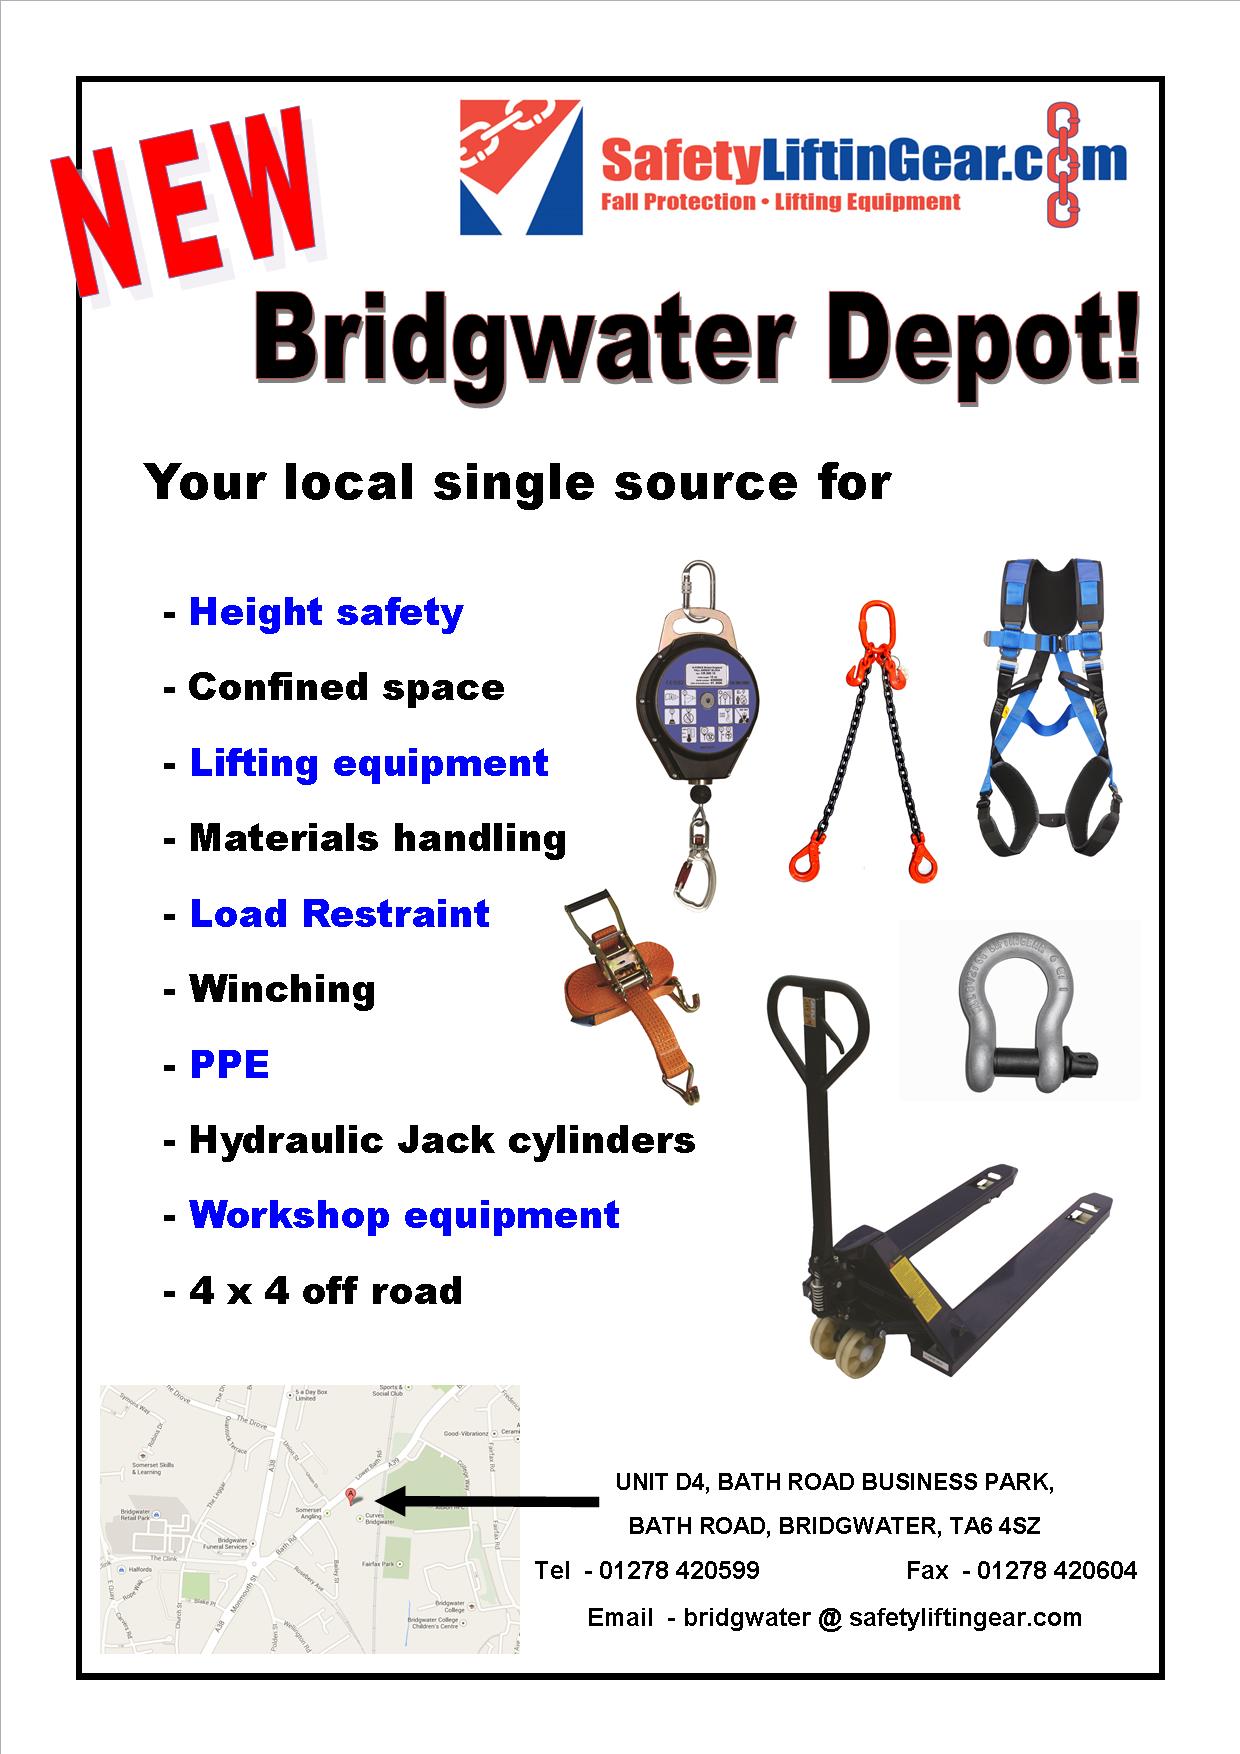 Pop in to our new Bridgwater depot opening 24th March 2014!